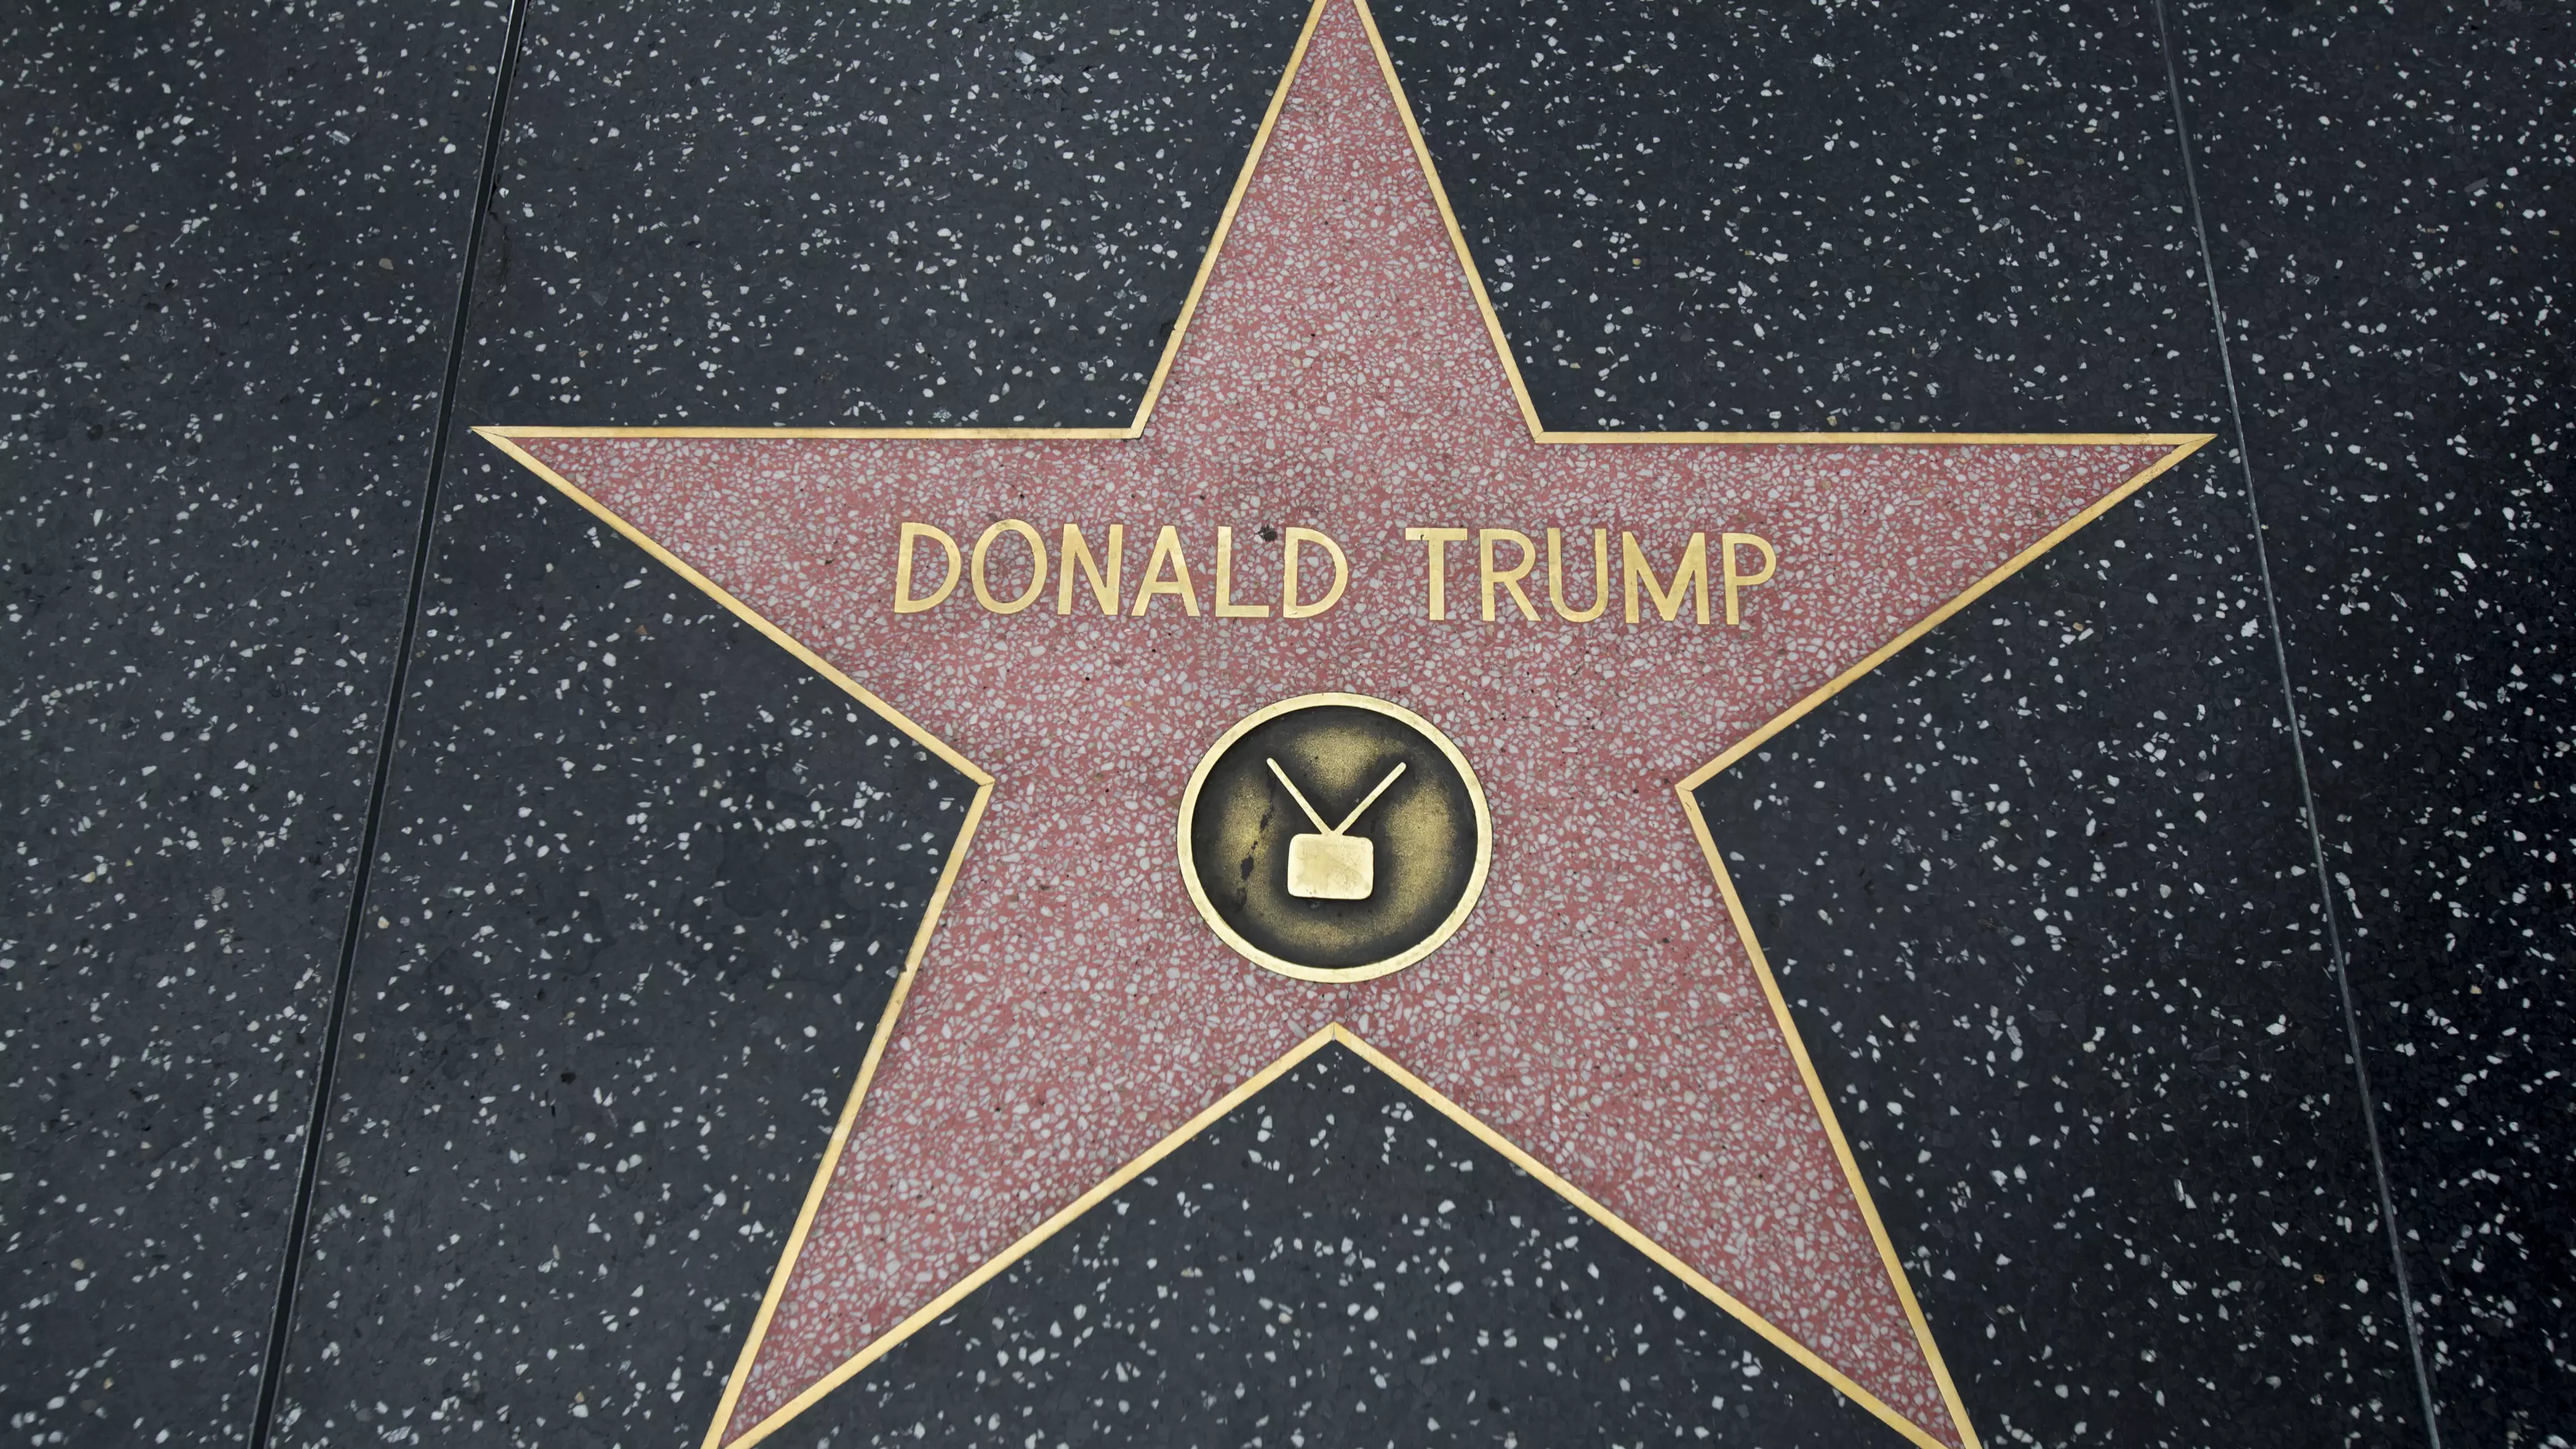 Man Who Defaced Donald Trump's Hollywood Star Bailed Out By The Last Guy